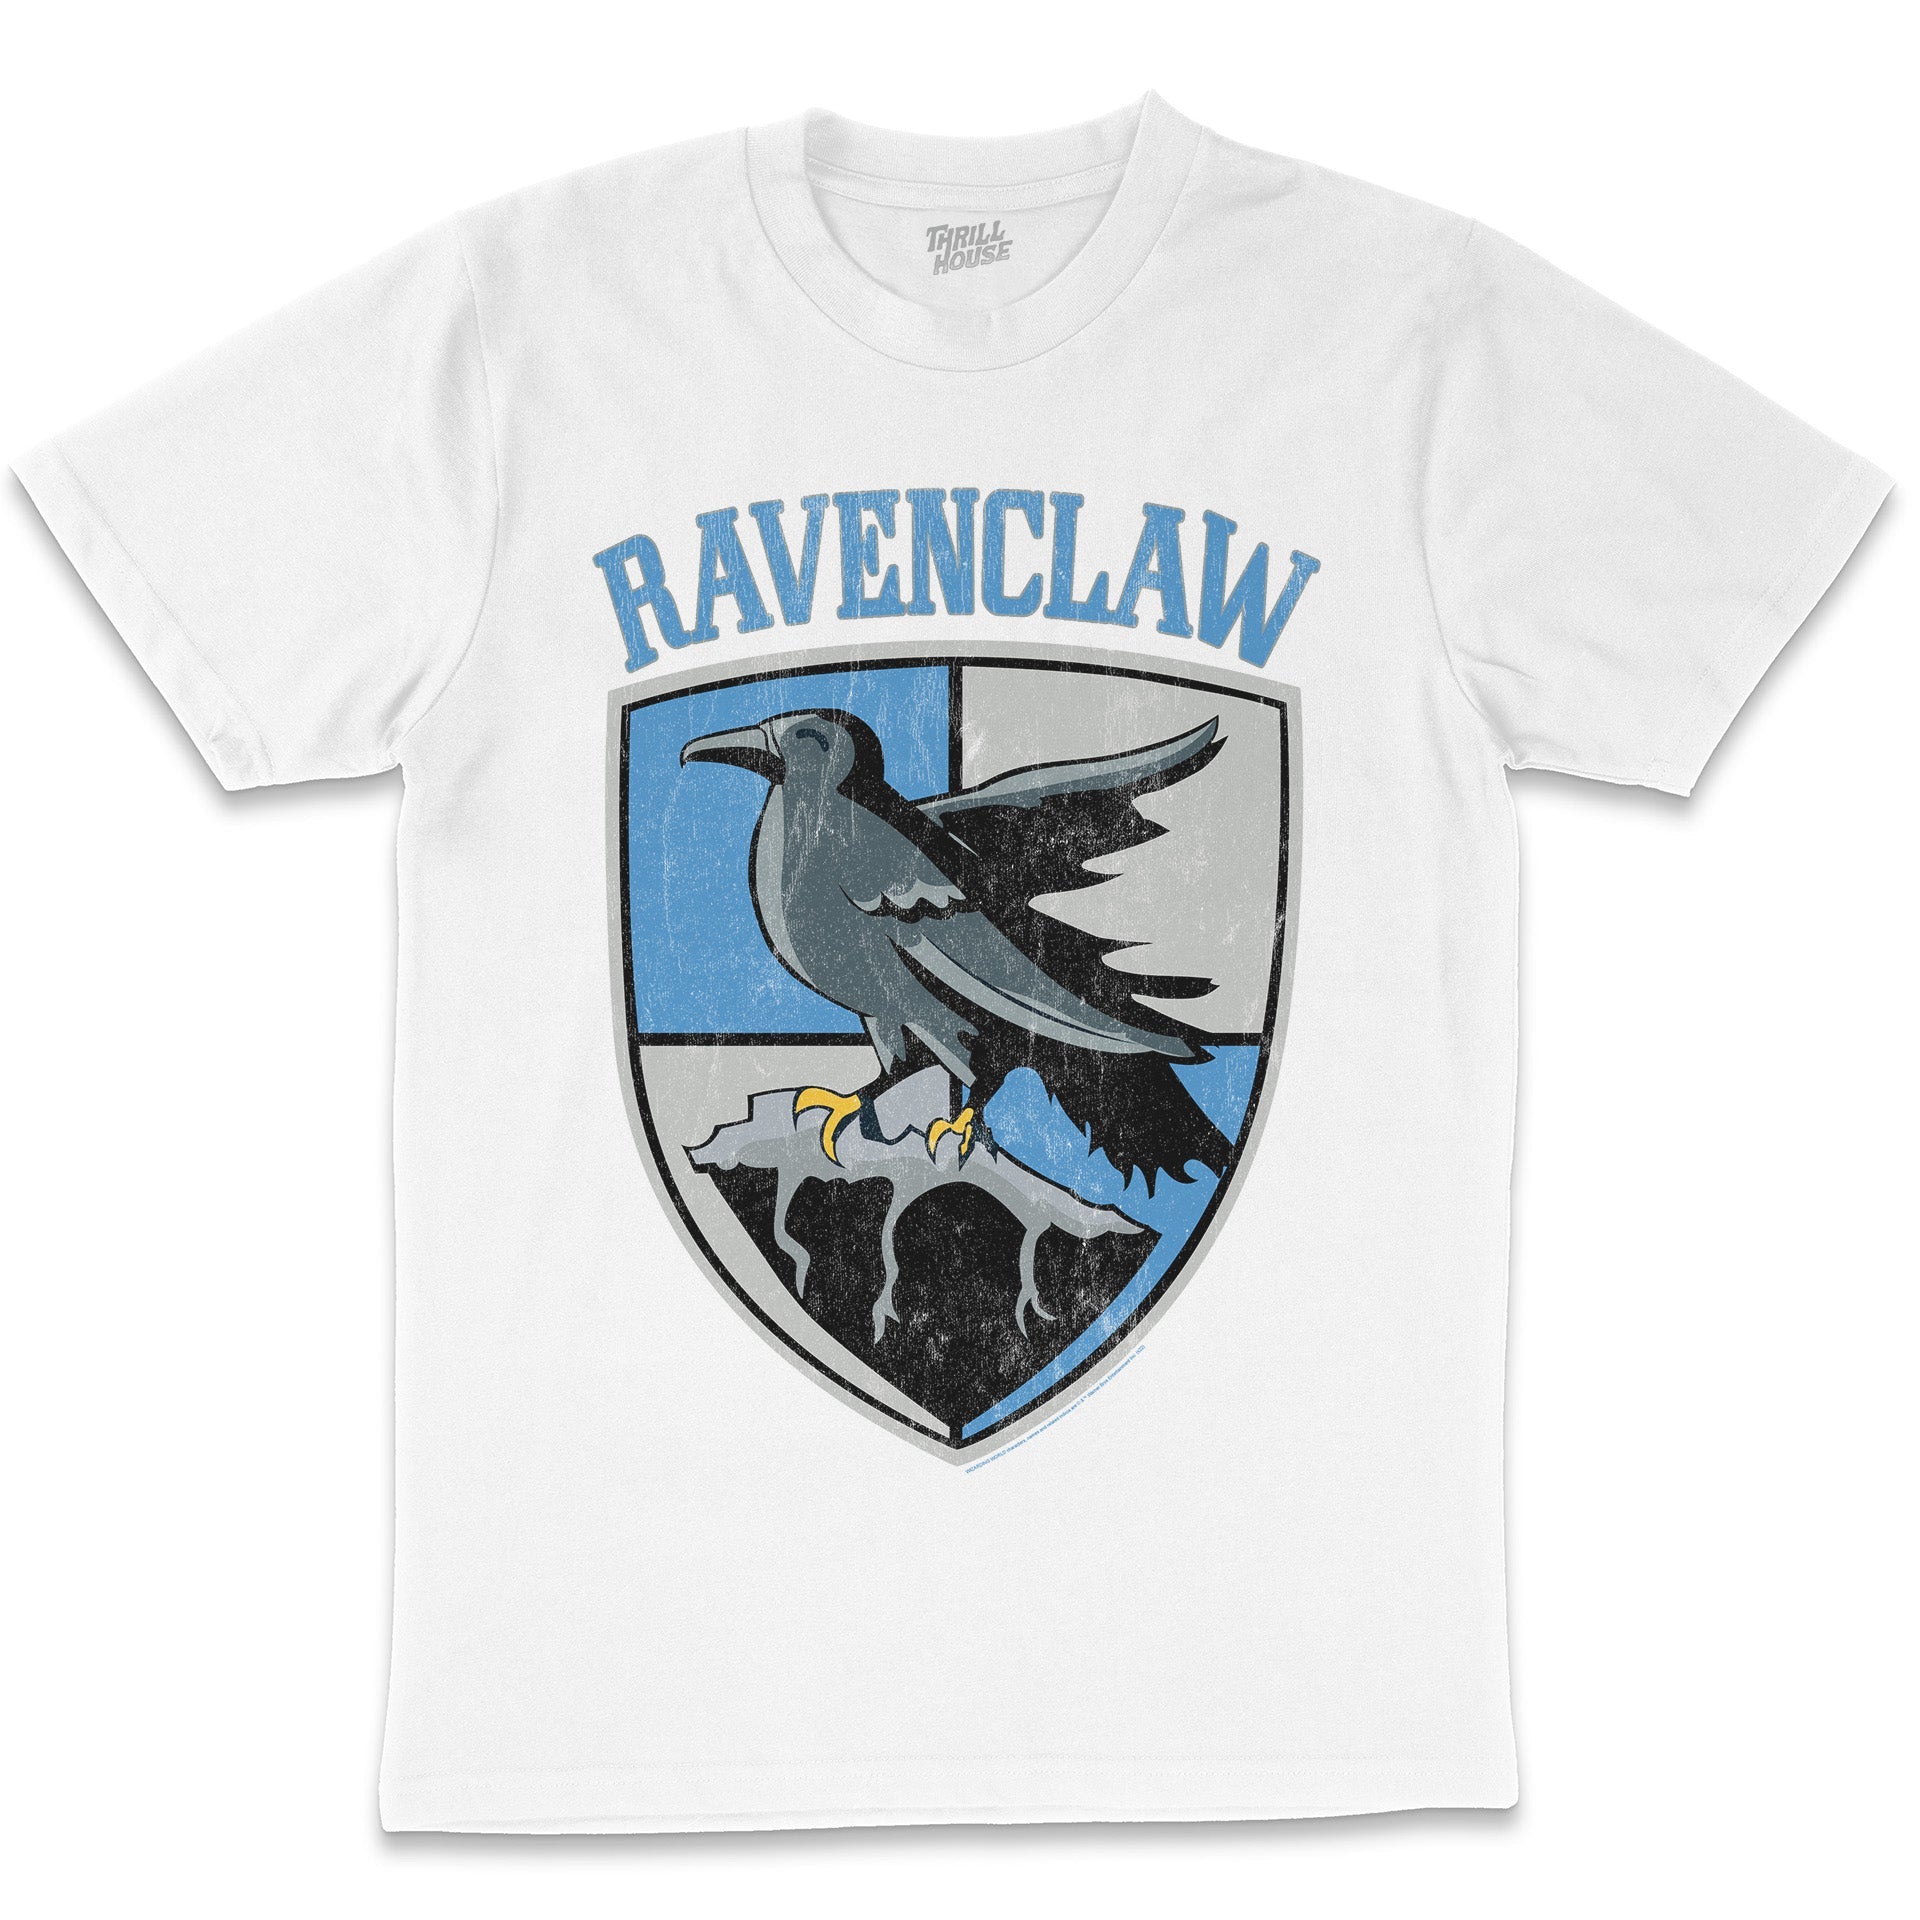 Harry Potter Ravenclaw Quidditch Team Hogwarts Witchcraft Wizardry School Officially Licensed Cotton T-Shirt